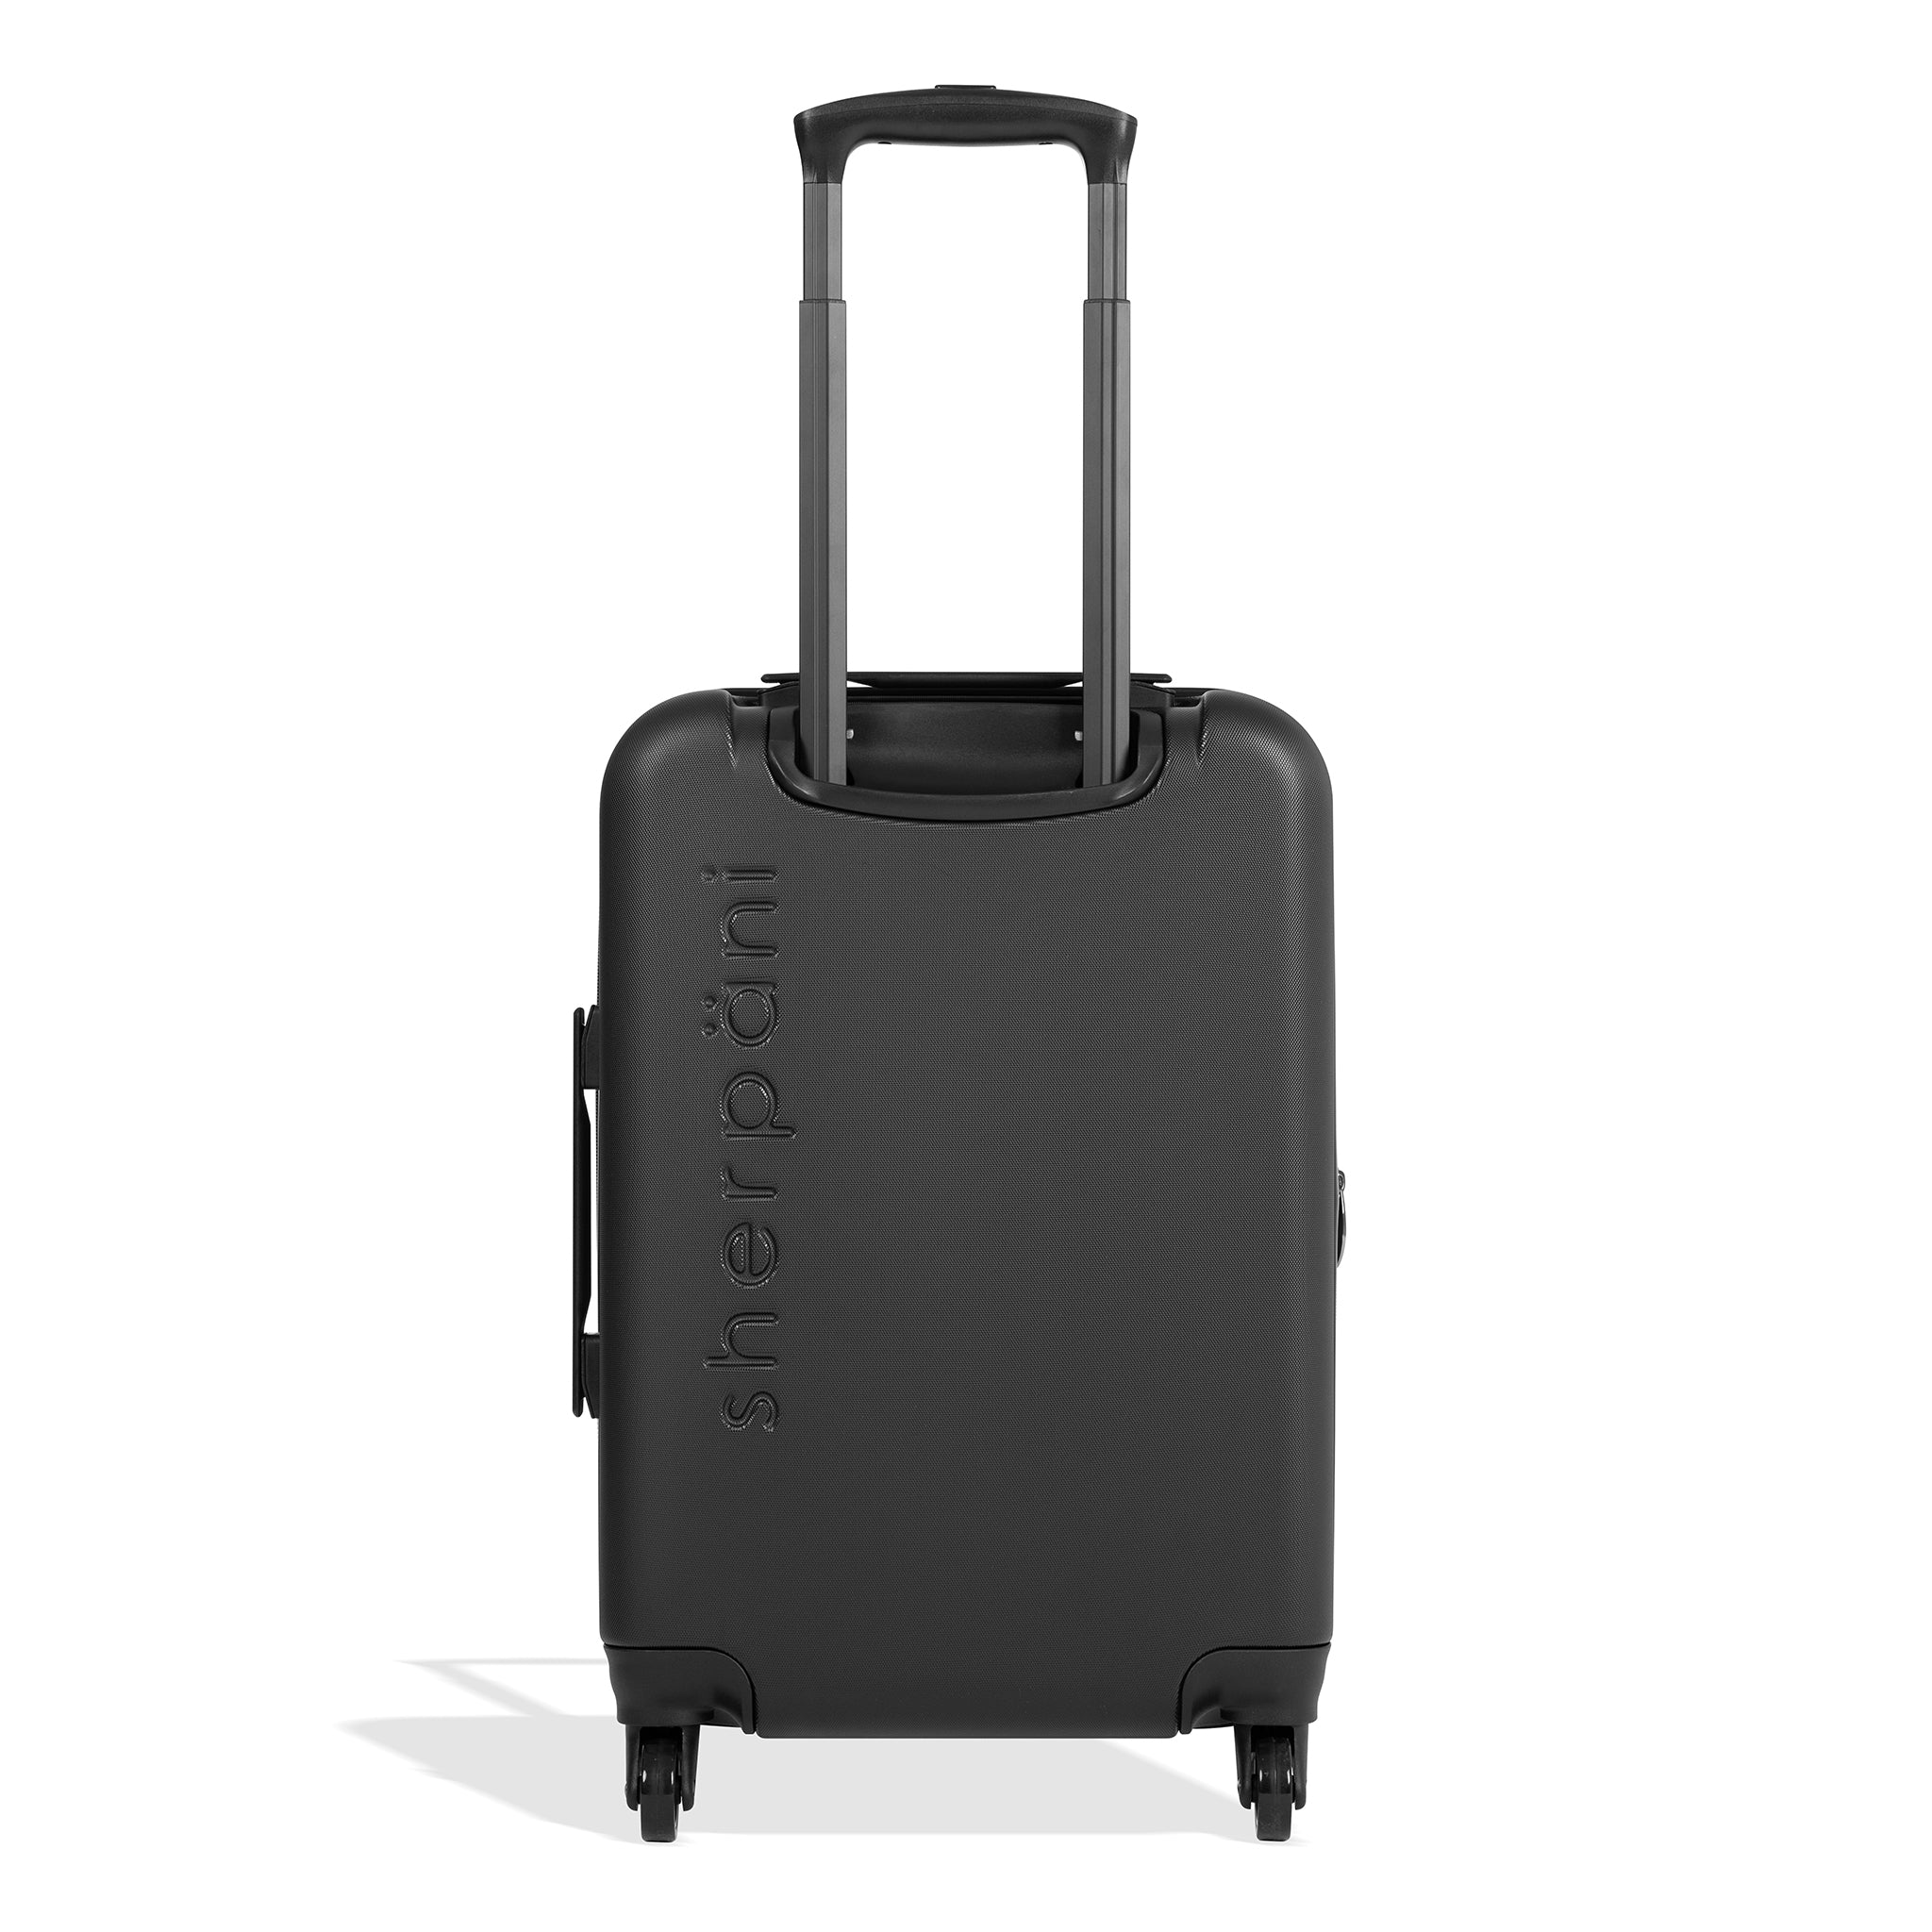 Back view of Sherpani hard-shell carry-on luggage, the Meridian in Bluff. Meridian features include a retractable luggage handle, uncrushable exterior, TSA-approved locking zippers and four 36-degree spinner wheels. The Bluff colorway is two-toned with the front of the suitcase in bluff and the back in classic black. 